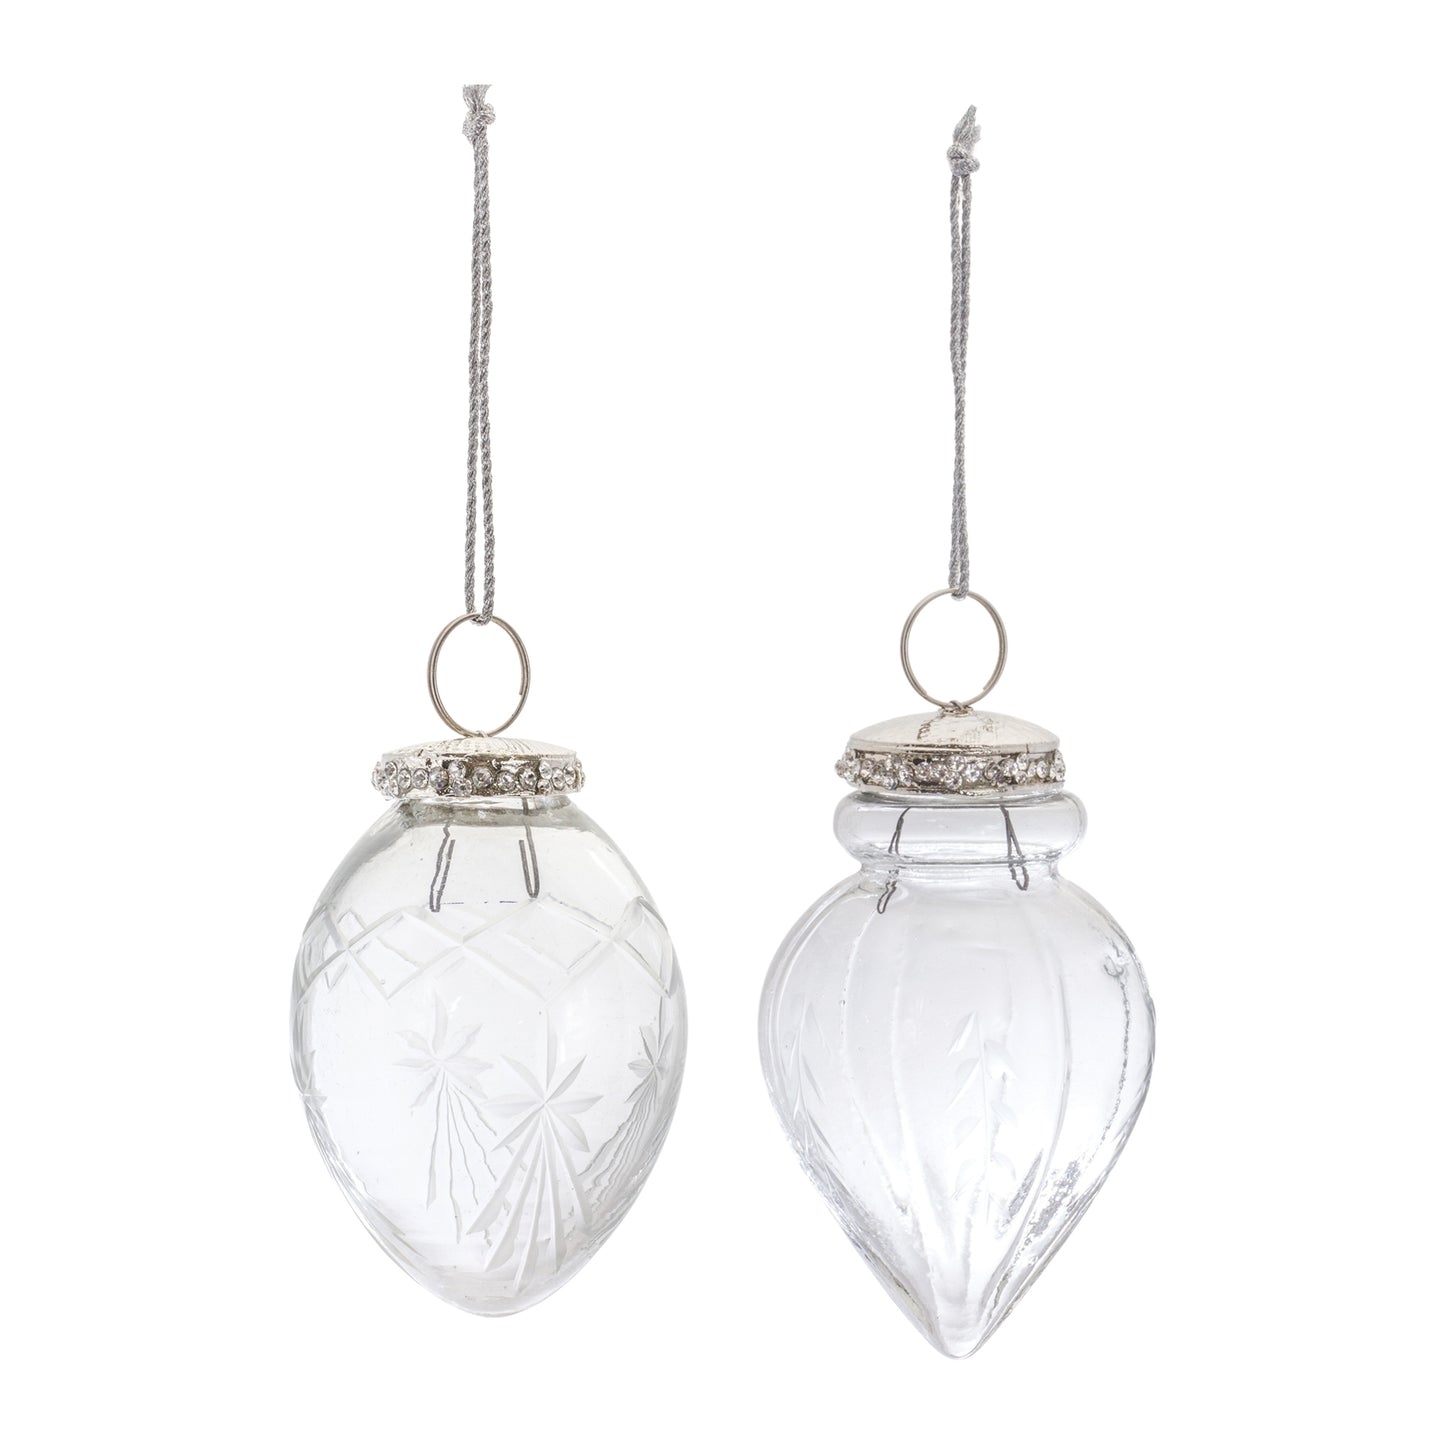 Etched Glass Teardrop Ornament (Set of 6)